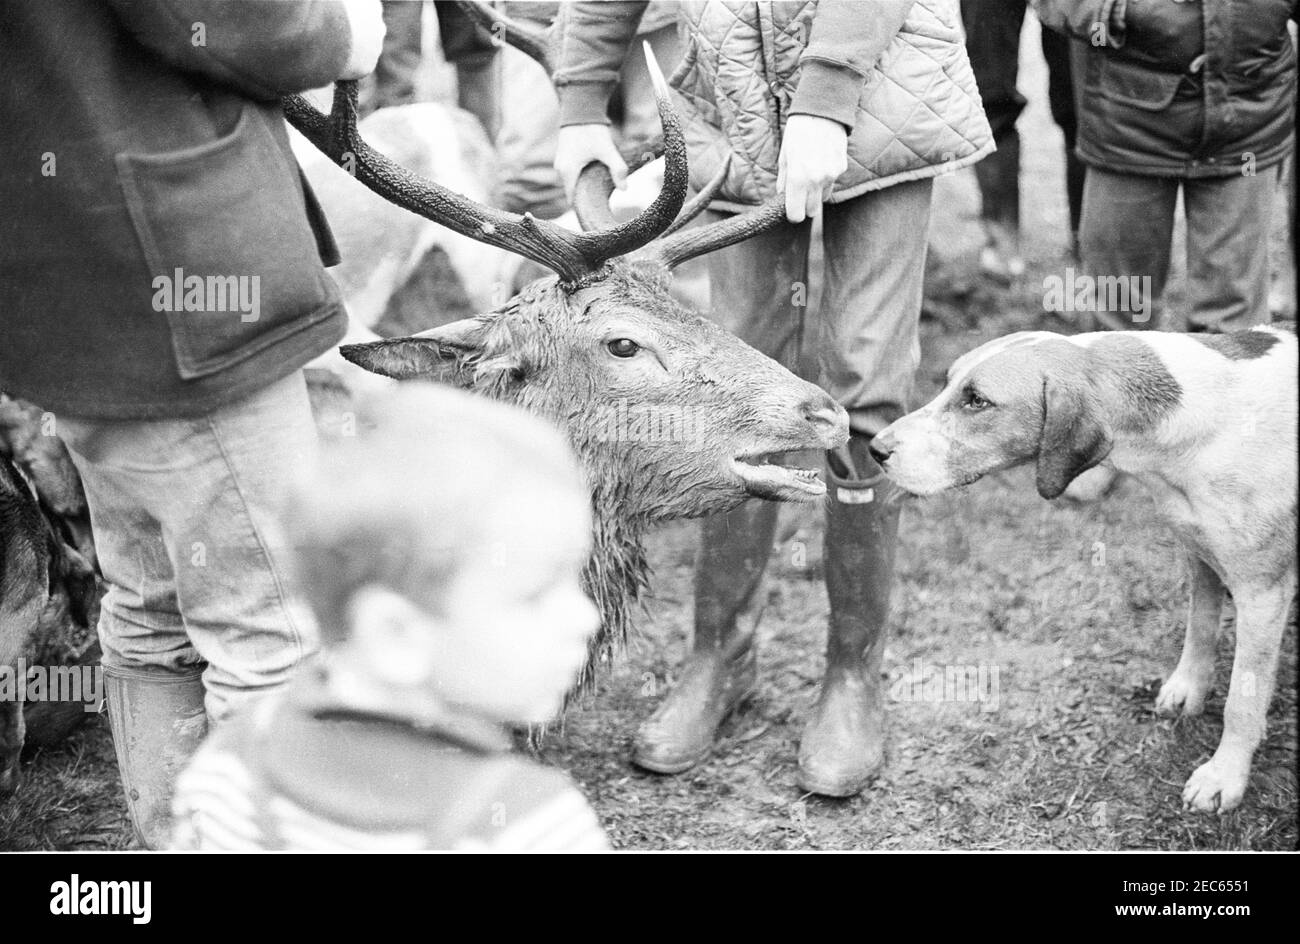 Tiverton Staghounds October 30th 1982. Here the dead stag has a close encounter with a hound whilst hunt supporters, including a young child, gather round. This was long before the Hunting Act 2004 that banned this pastime on grounds of cruelty. Stock Photo